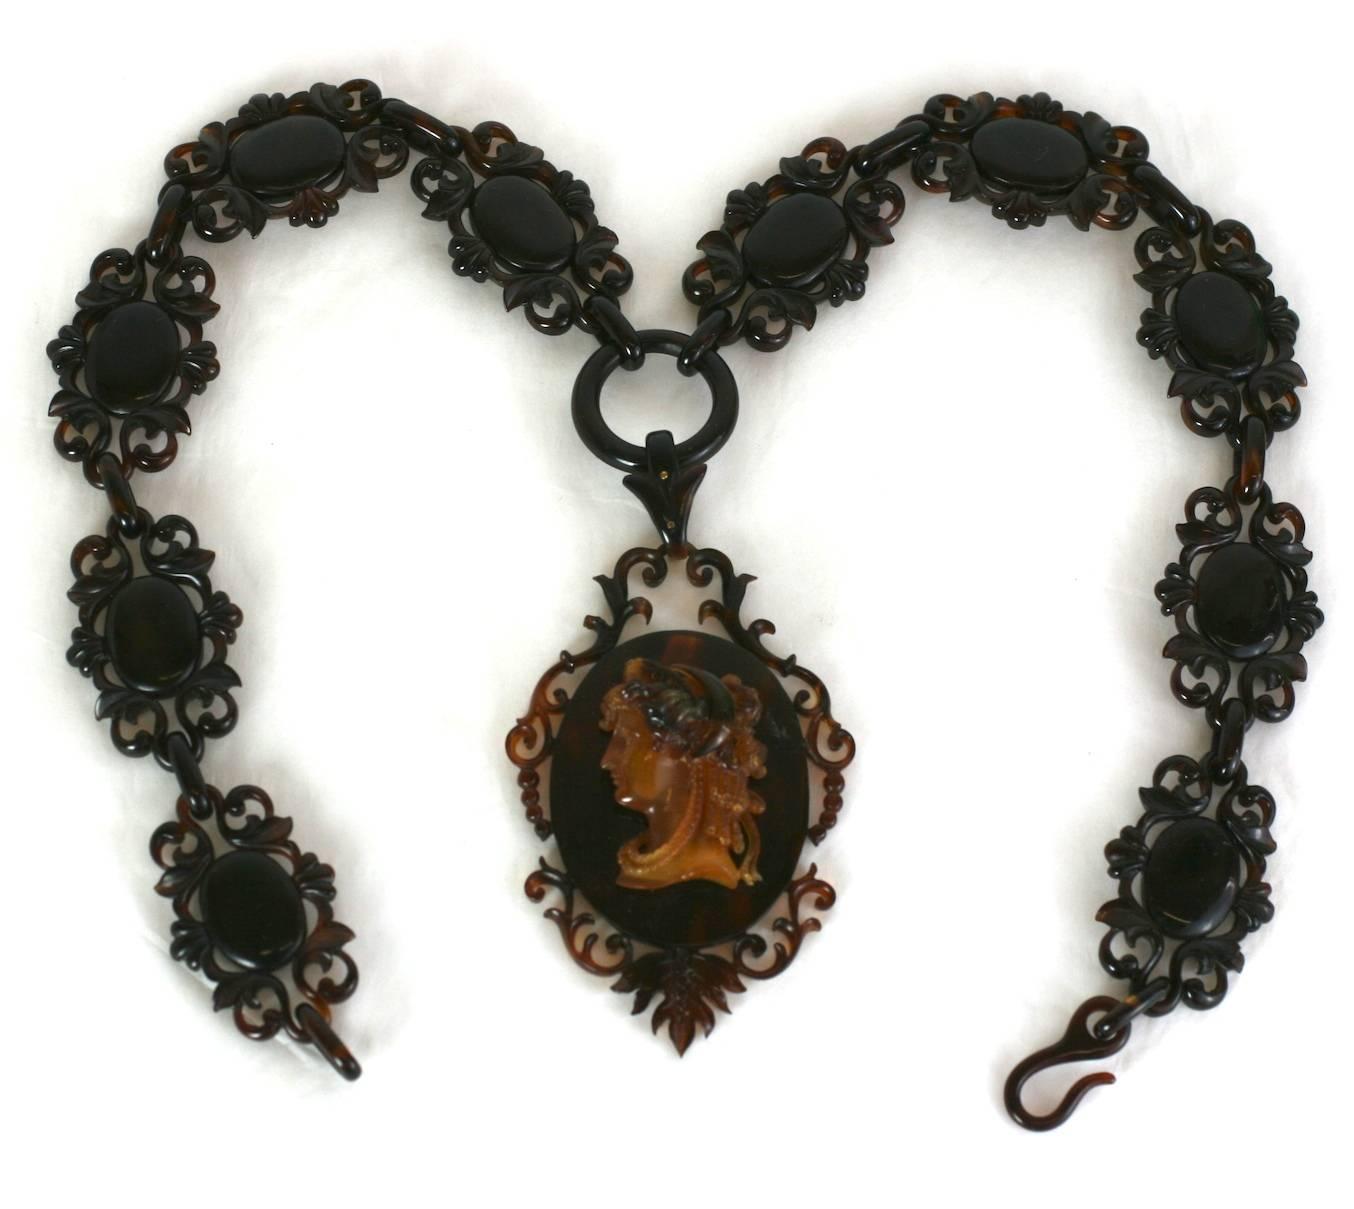 Wonderful Mid Victorian Tortoise Cameo Necklace. Massive and beautifully carved with central pendant depicting the Goddess Luna, personifying the moon and all her attributes....instinct, creativity, luck, femininity, water, miracles as well as